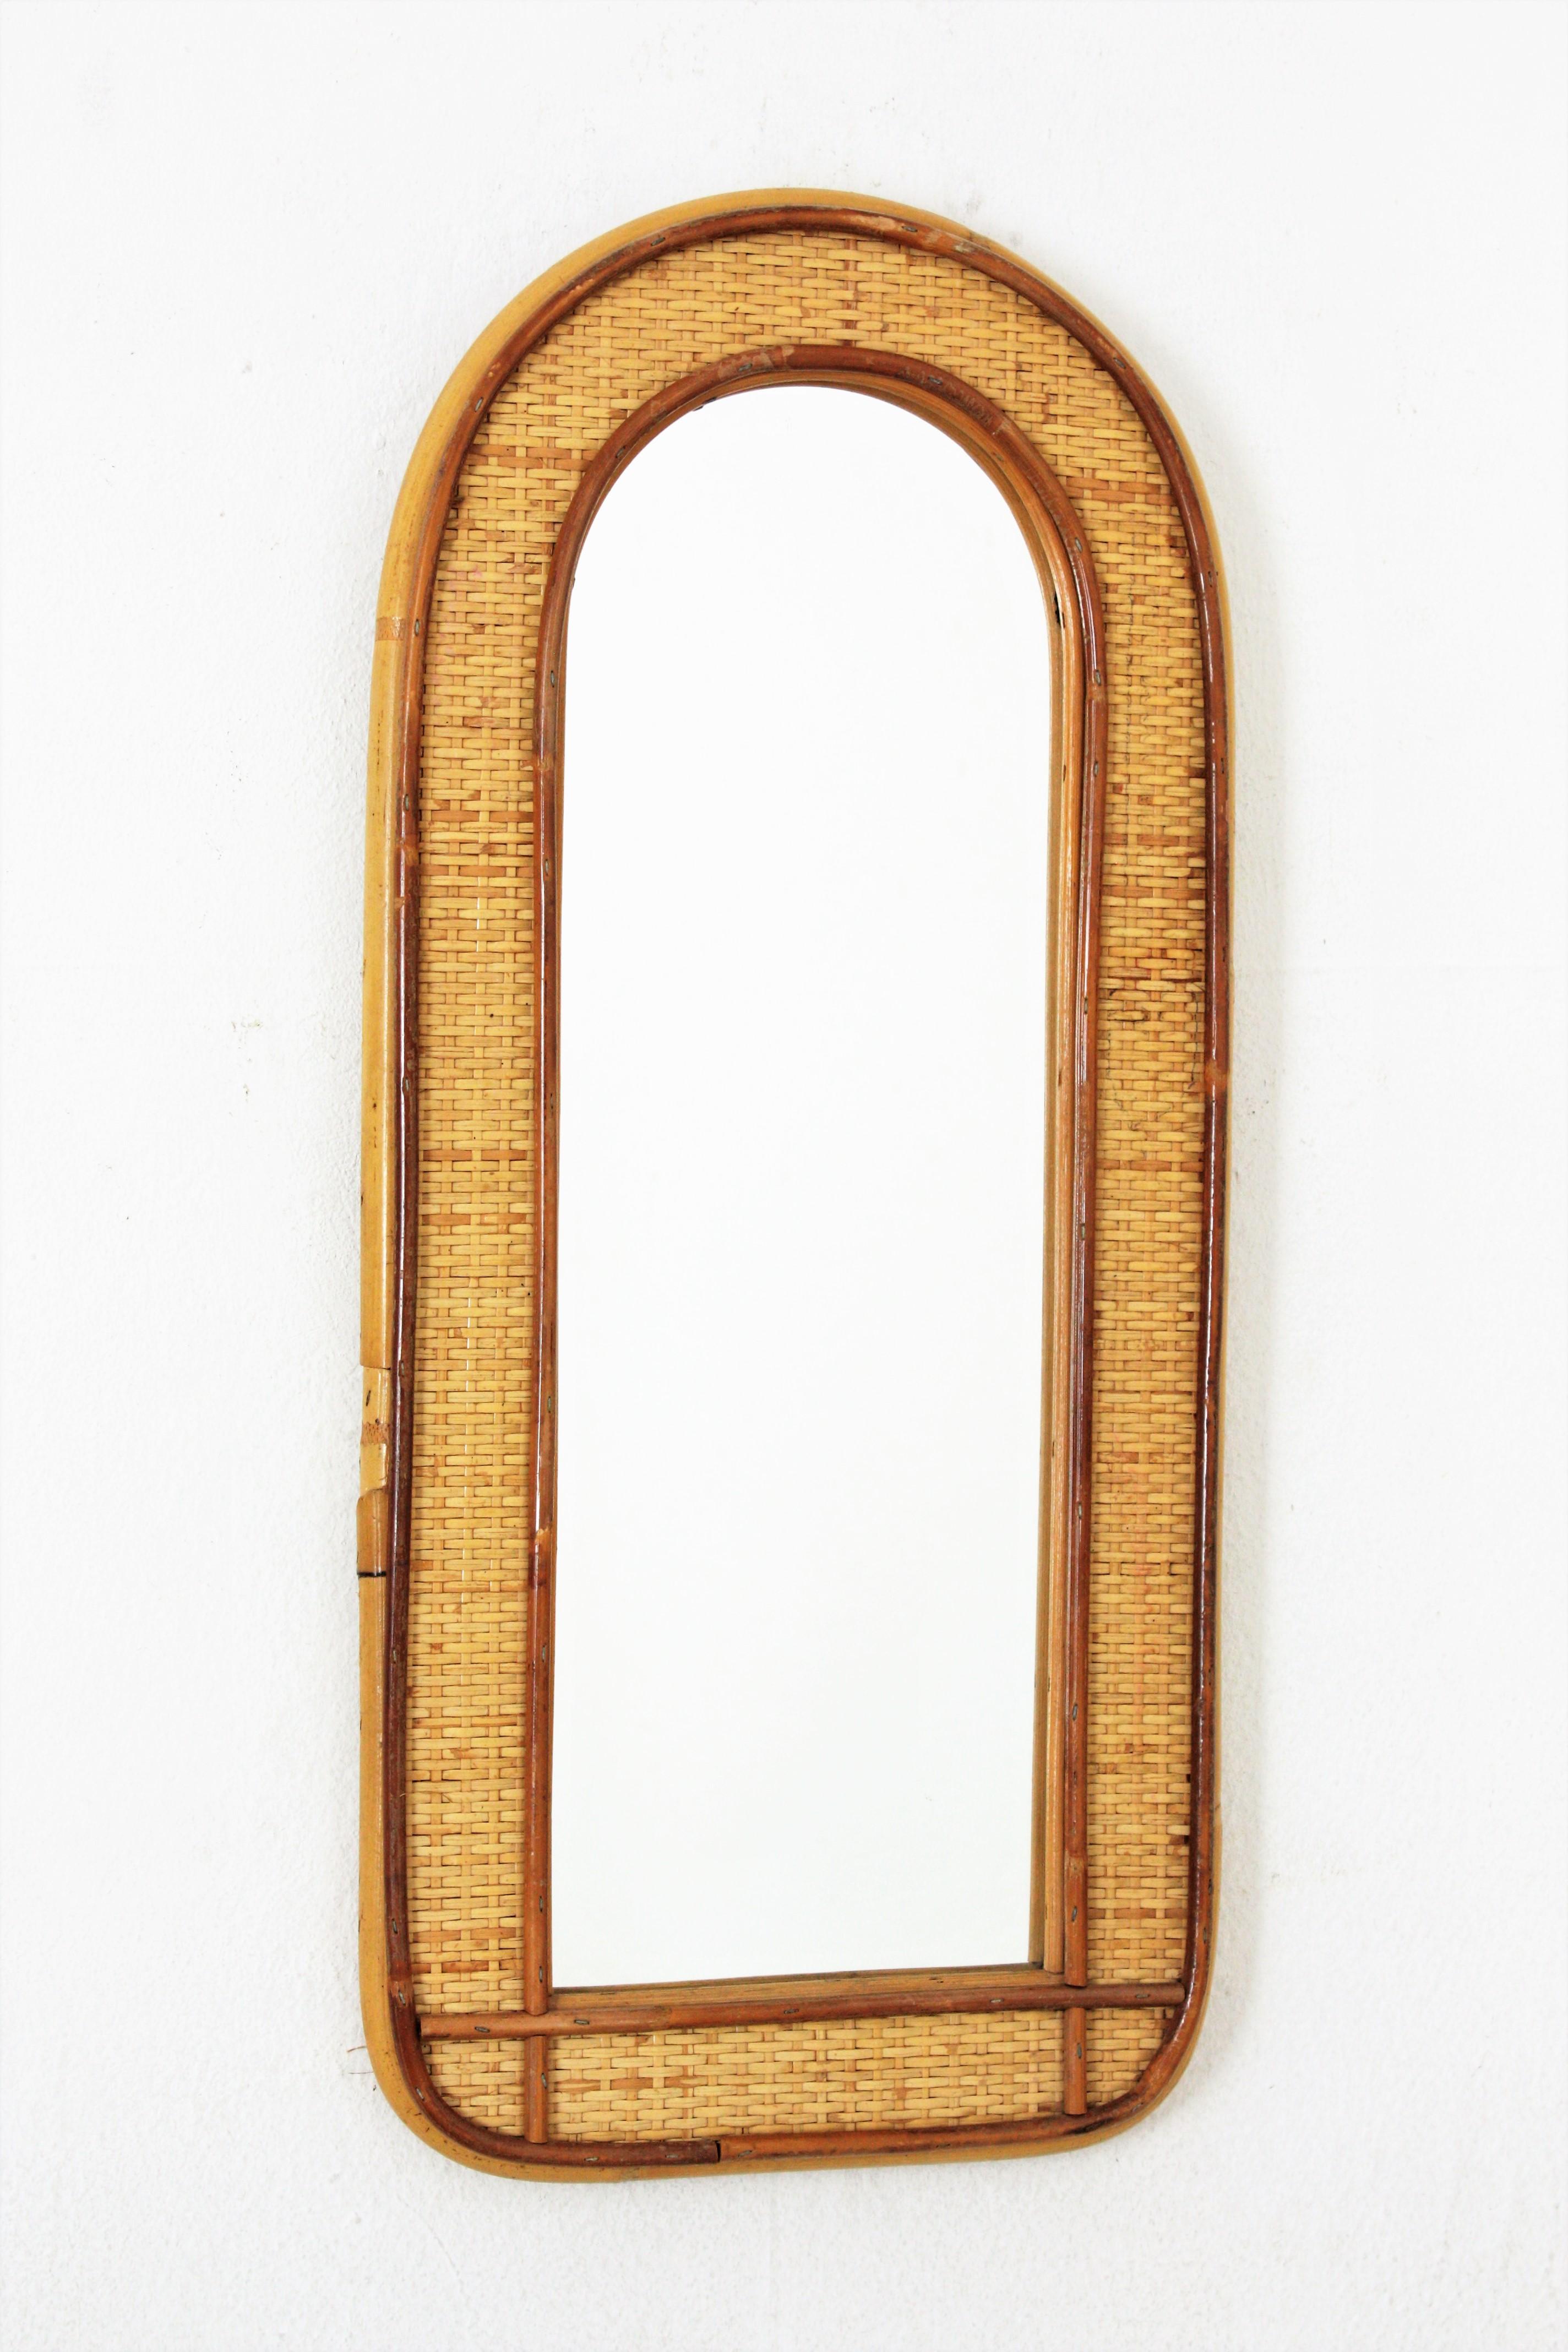 Arched mirror in Rattan and Wicker, Italy, 1960-1970.
Elegant mid-20th century woven wicker, bamboo rattan mirror with arched top. 
This beautiful mirror double framed with rattan cane and wicker weave will be the perfect choice to add a